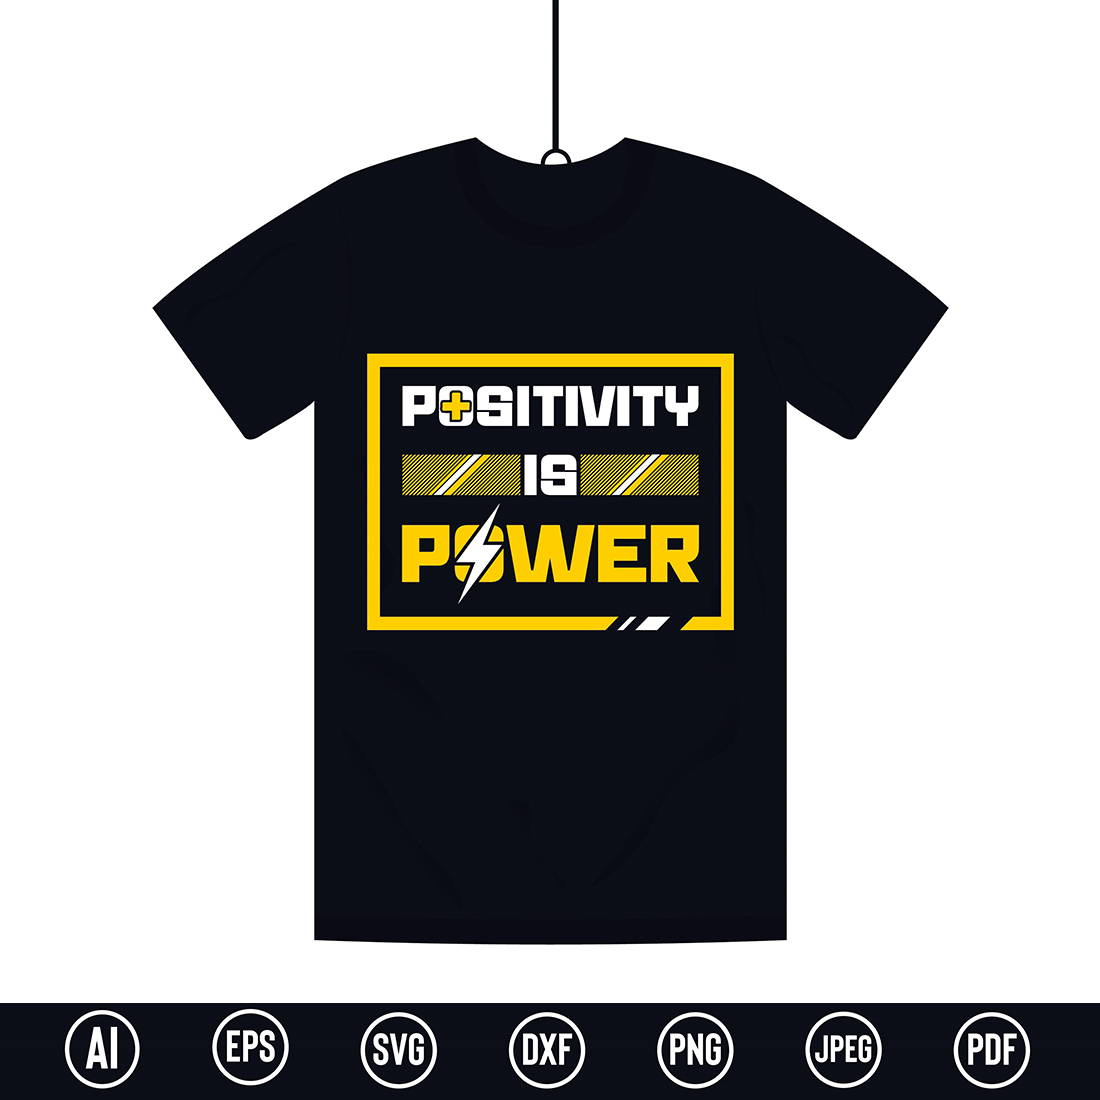 Modern Inspirational Typography T-Shirt design with “Positivity is Power” quote for t-shirt, posters, stickers, mug prints, banners, gift cards, labels etc preview image.